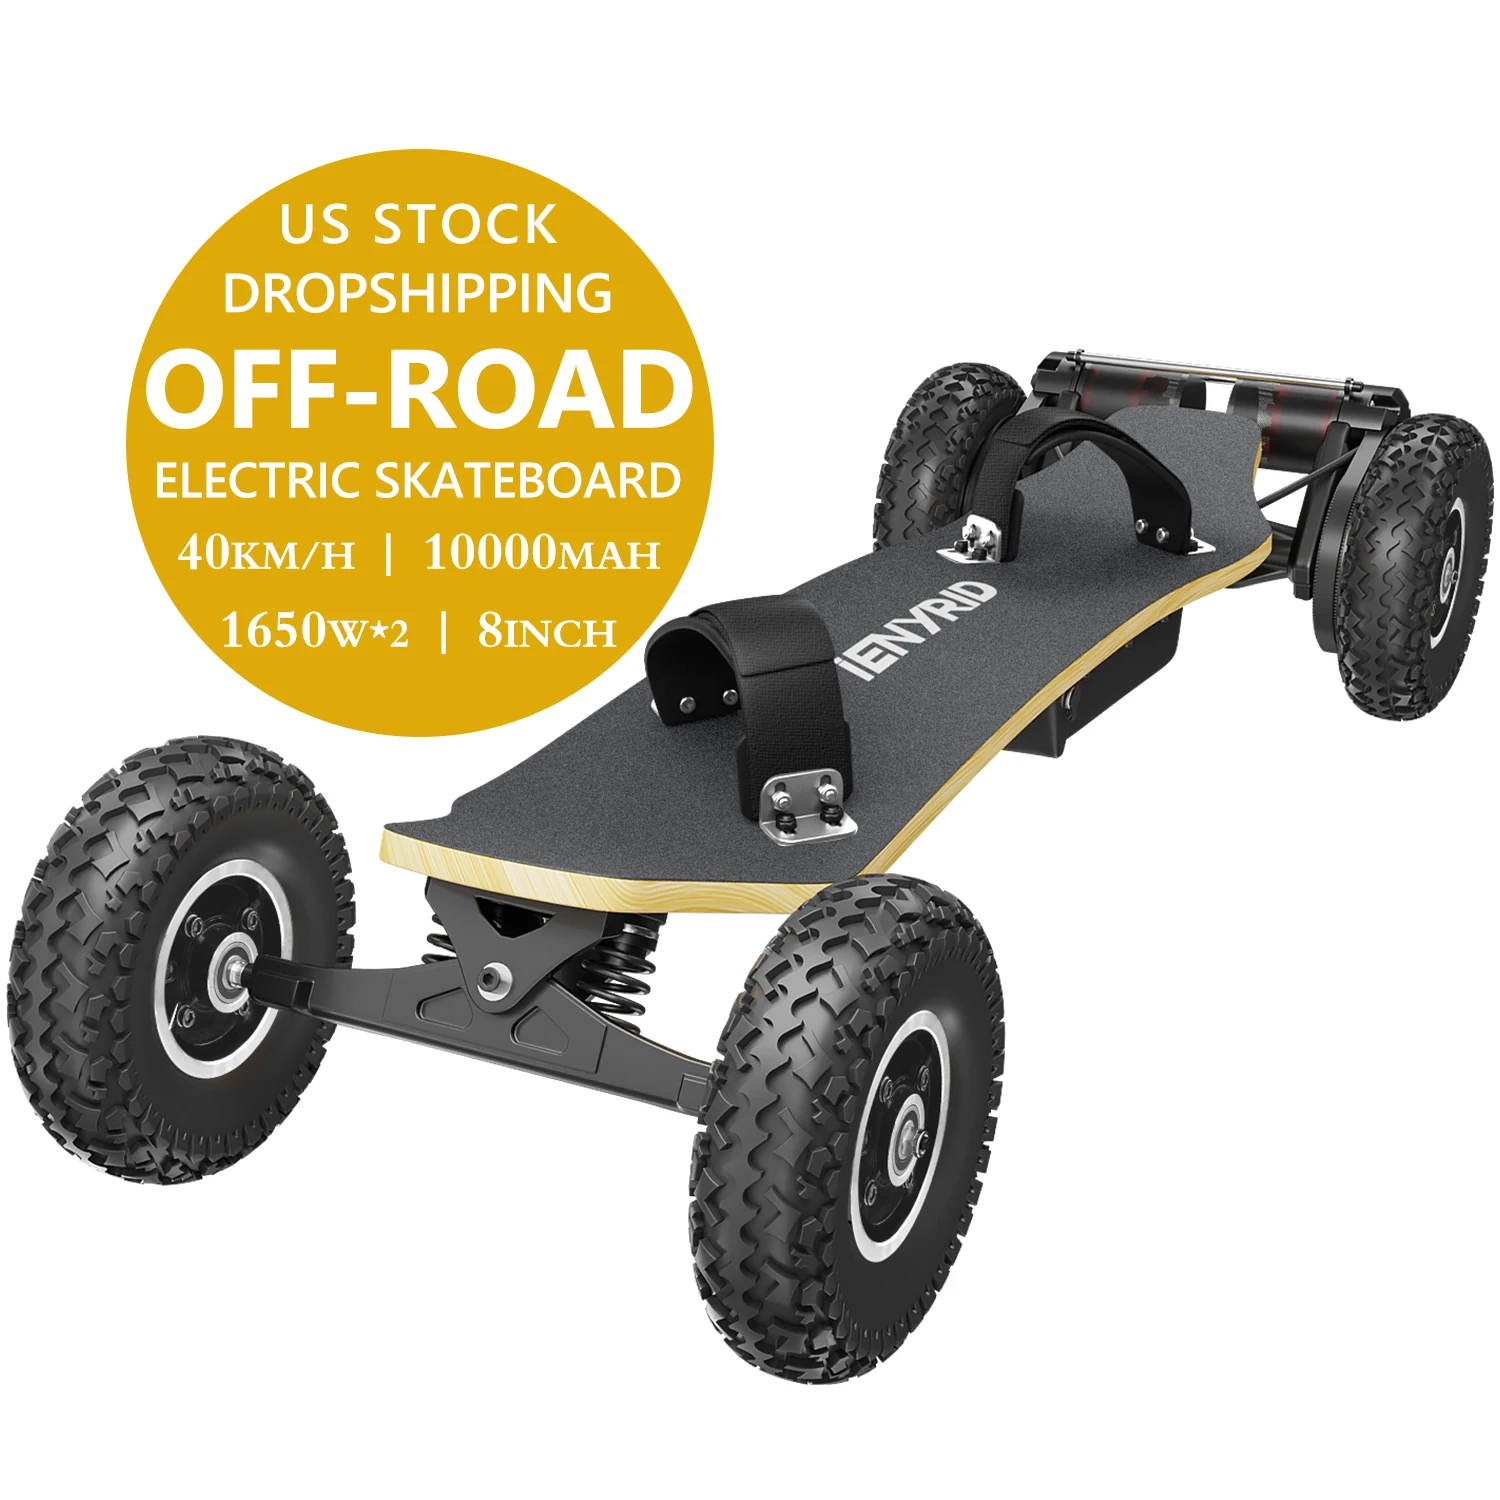 

Terrain off Road Electric Skateboard Dual Motor Each 1650W*2 Max Load 180kg with Remote Control USA warehouse